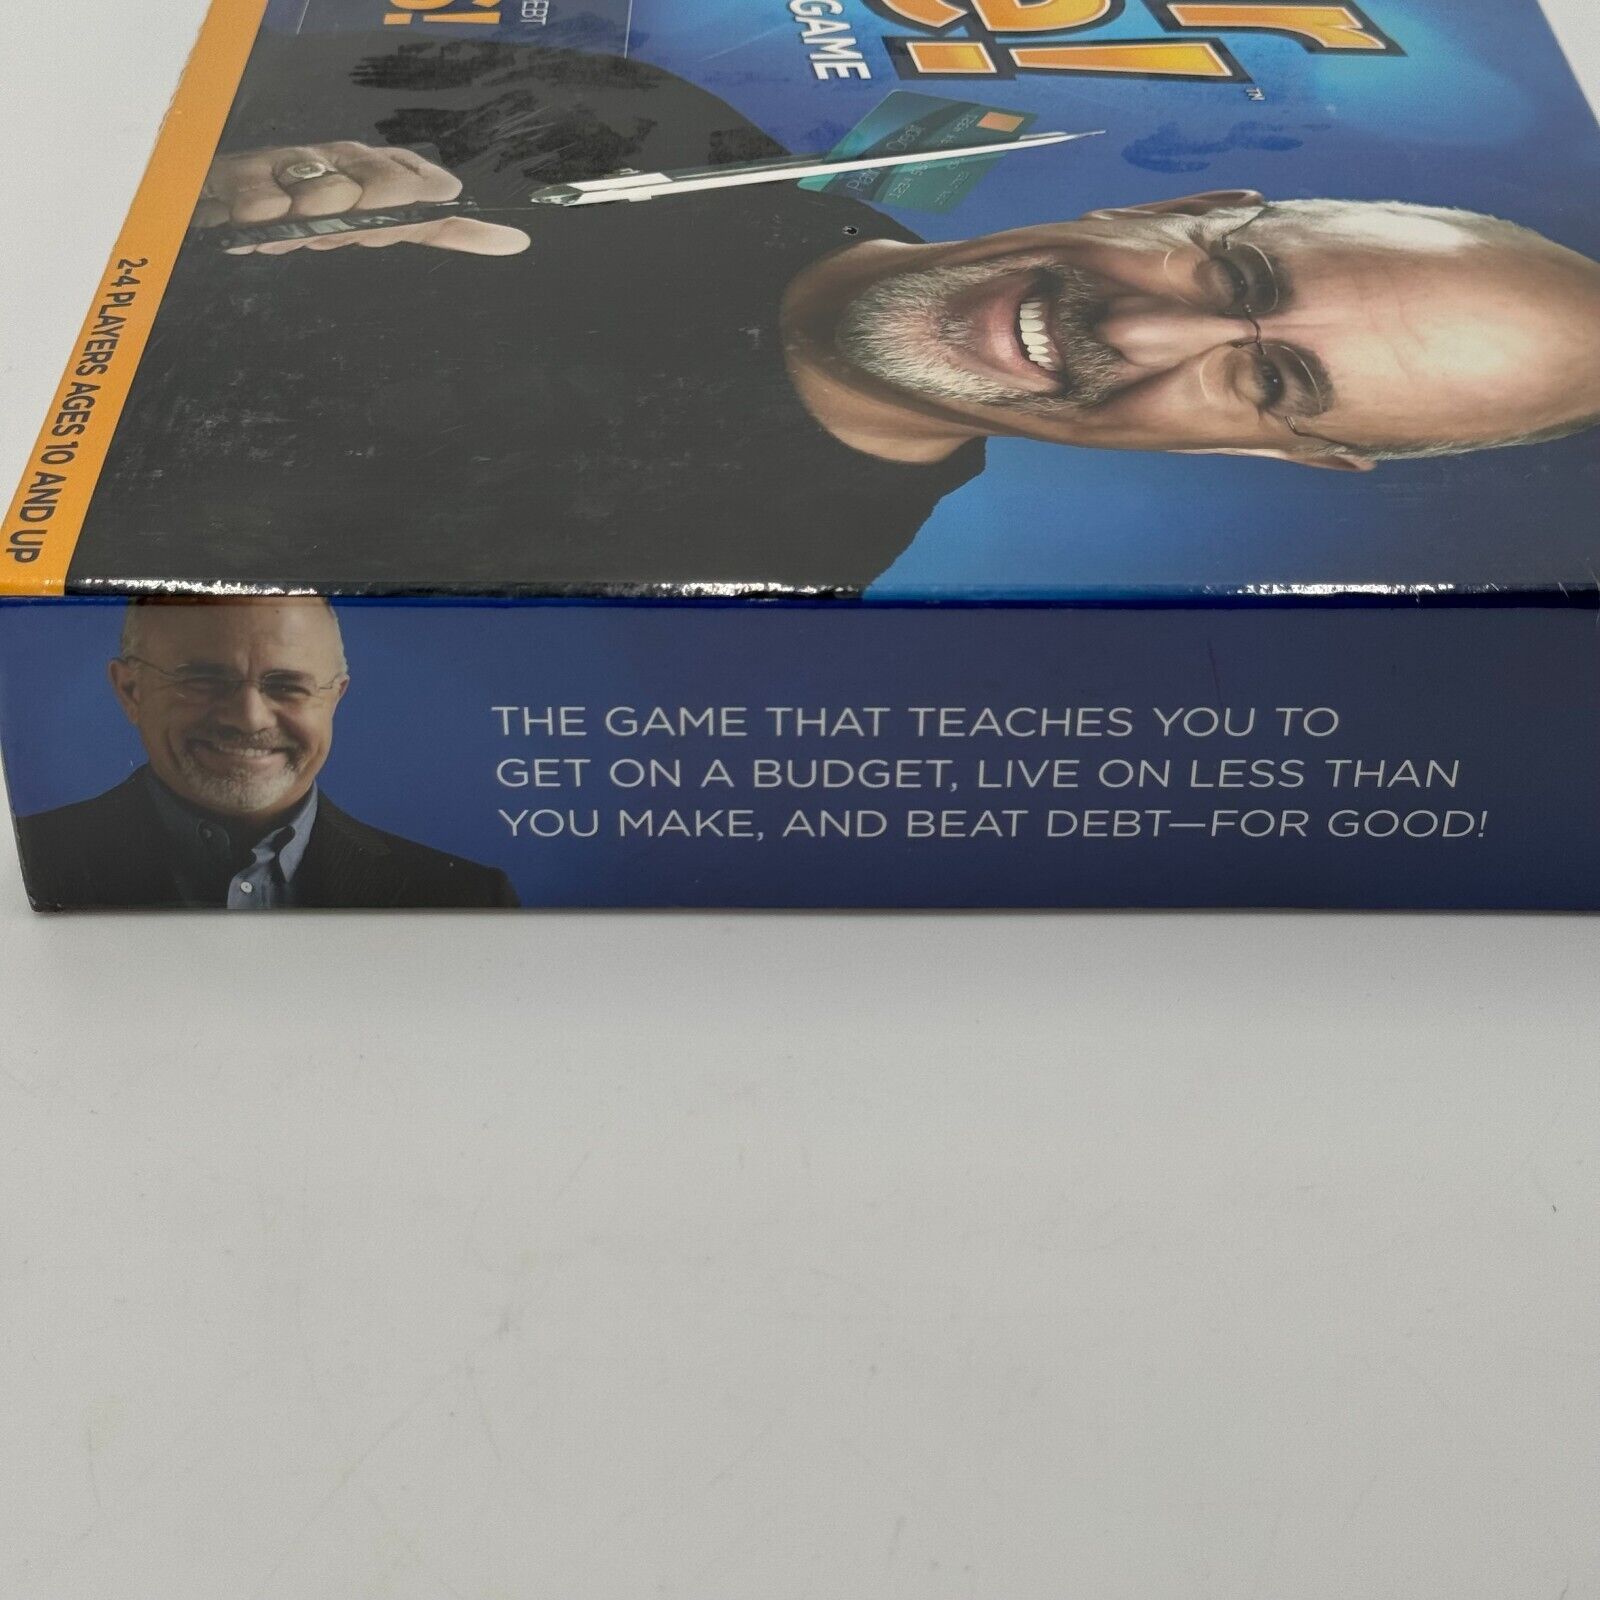 Dave Ramsey's Act Your Wage Board Game NEW SEALED